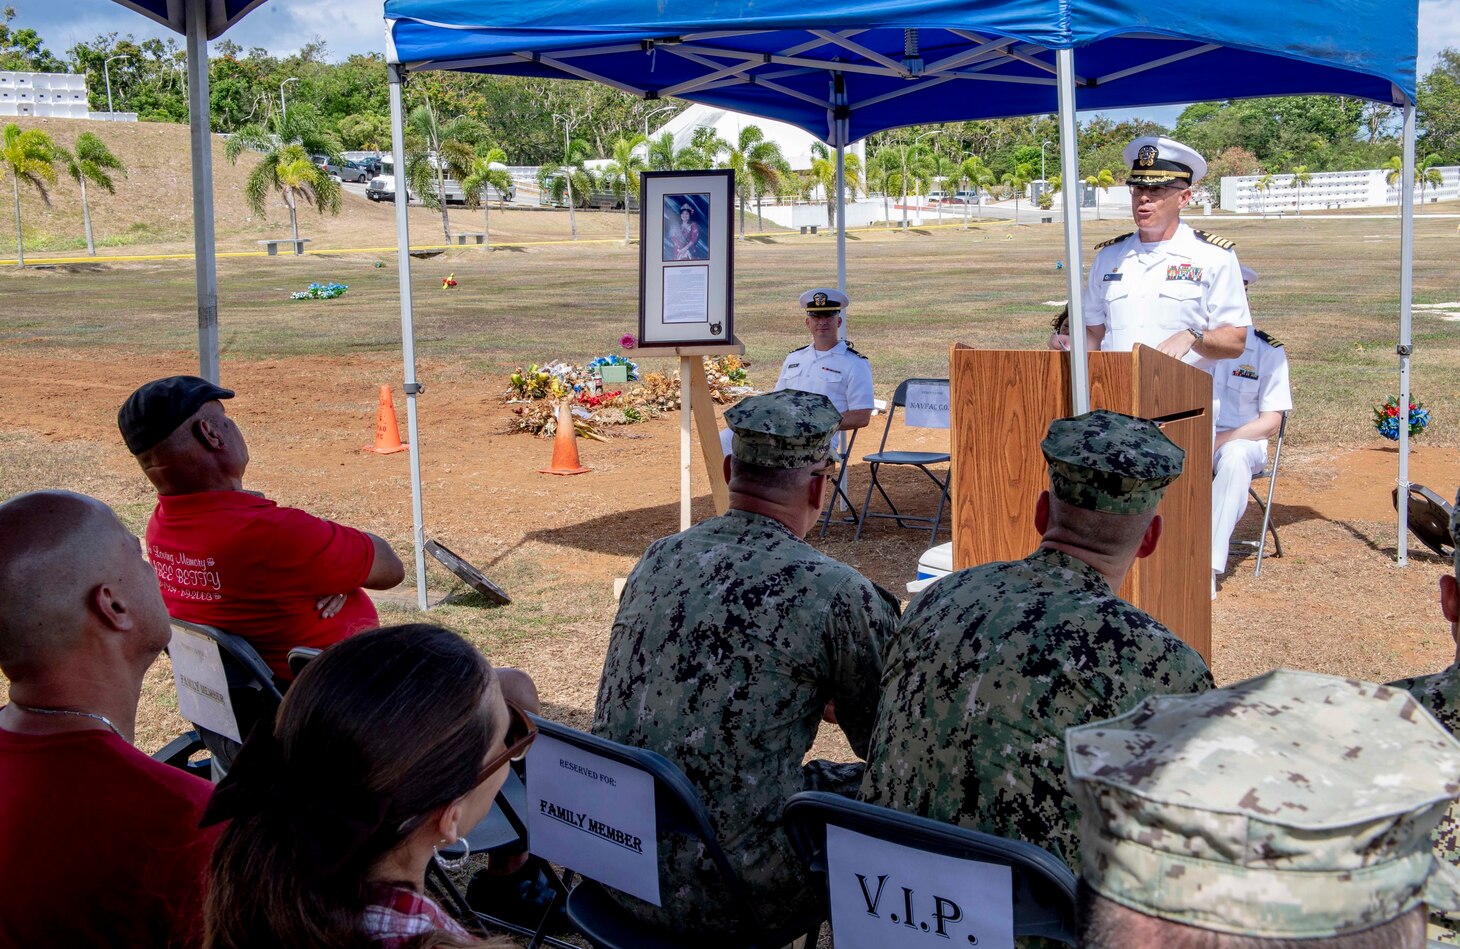 PITI, Guam (June 20, 2019) Capt. Dale Turner, commanding officer of Naval Facilities Engineering Command (NAVFAC) Marianas, speaks during the Seabee Betty Day memorial celebration. Seabee Betty died June 9, 2003 and was interred June 20, 2003. In 2004, the governor of Guam declared June 20 to be Seabee Betty Day to honor the more than 50 years of dedicated service to the Seabee community on Guam.